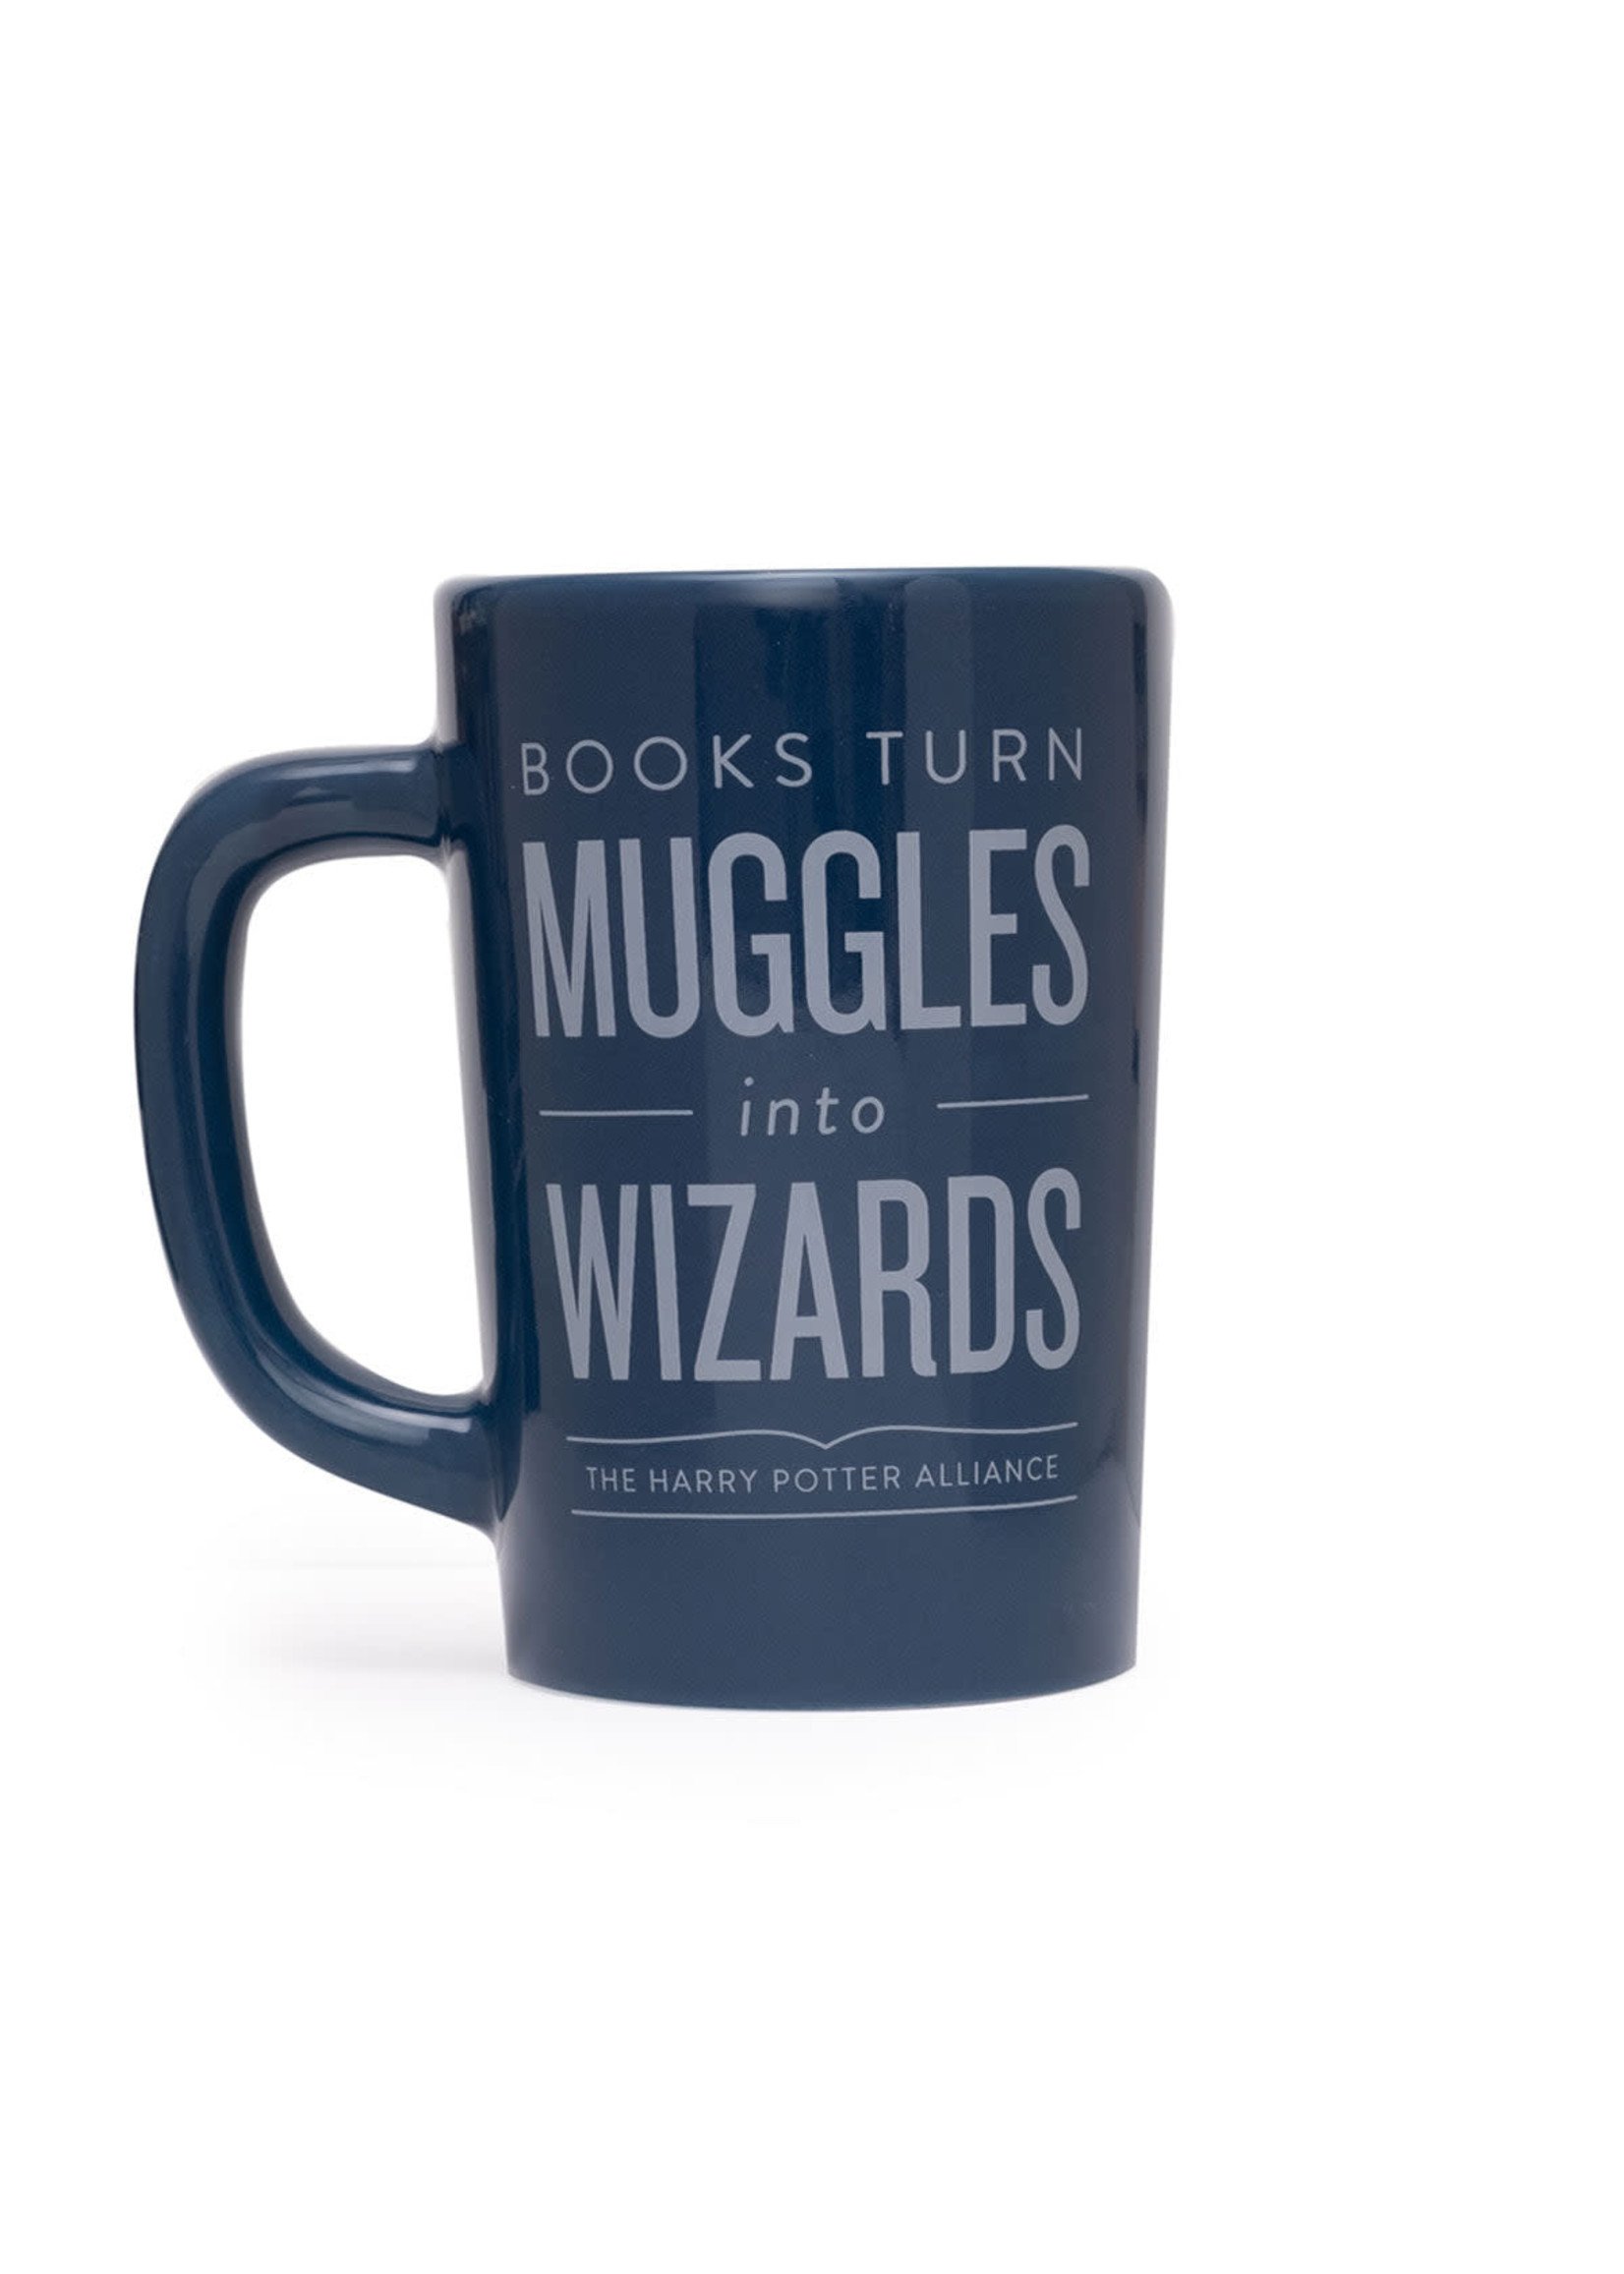 Out of Print Mug Books Turn Muggles Into Wizards